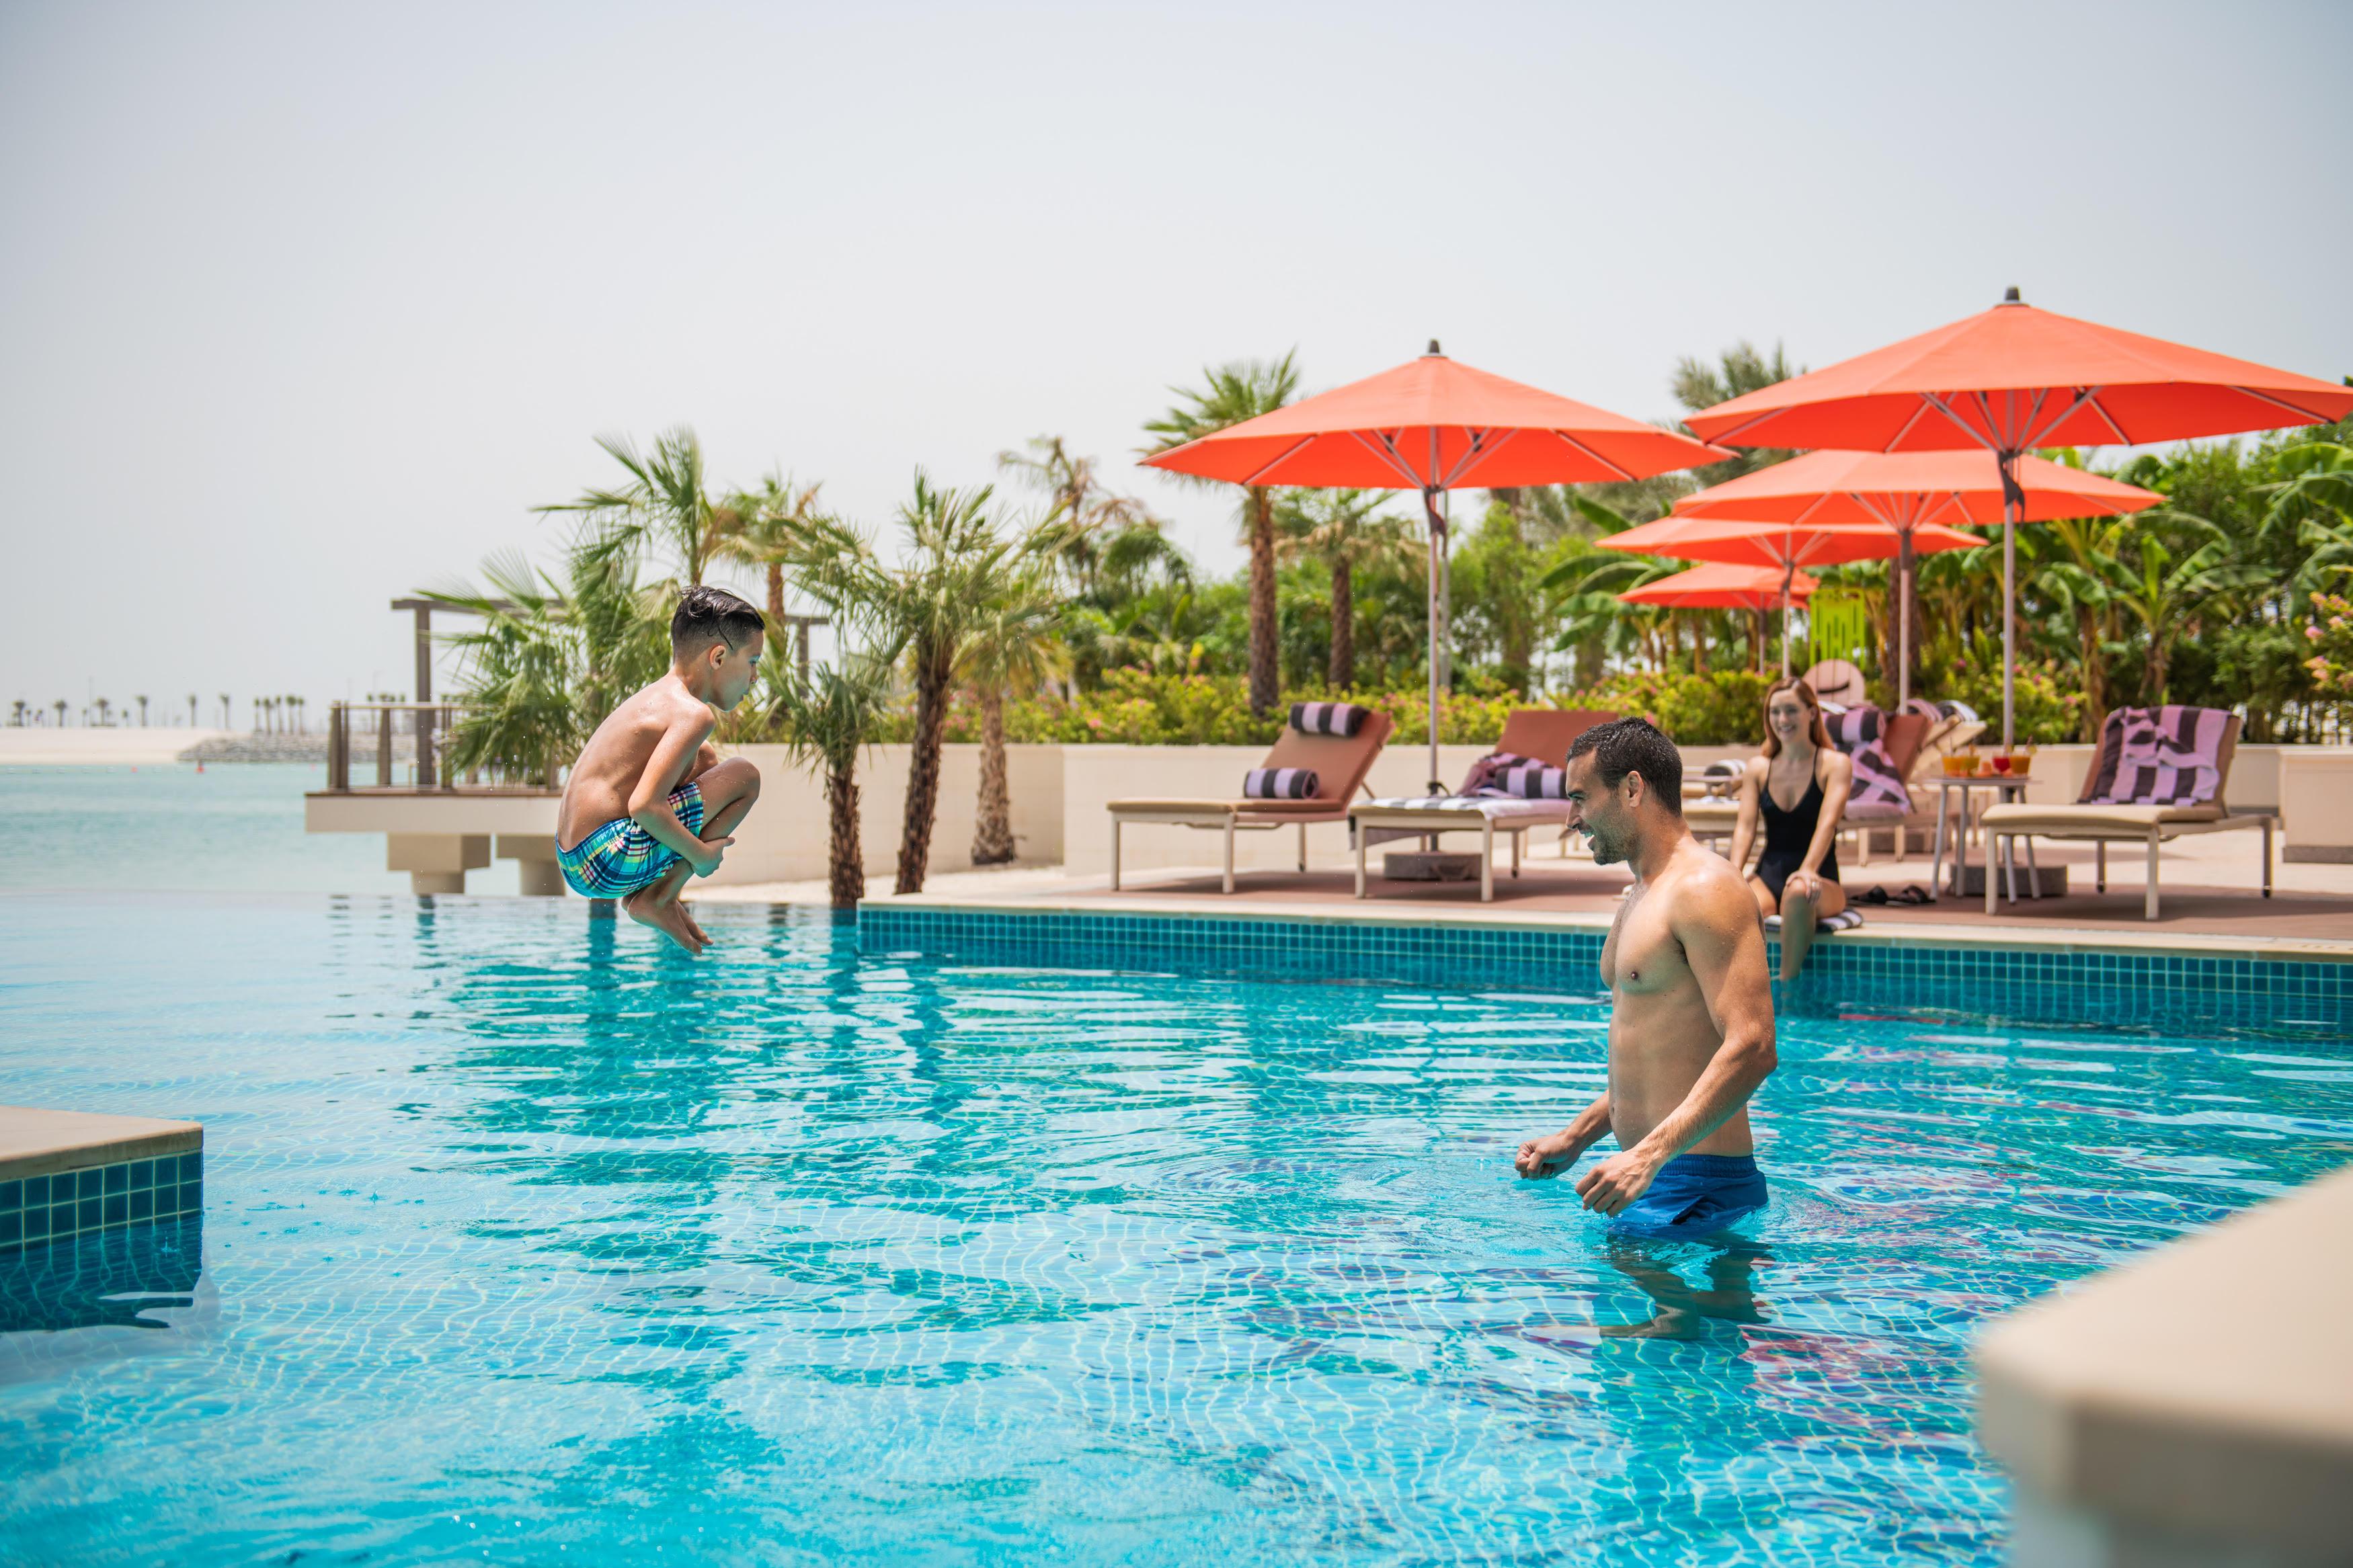 SUMMER STAYCATION - INDULGE A LUXURIOUS 5-STAR STAYCATION EXPERIENCE AT GRAND HYATT ABU DHABI 